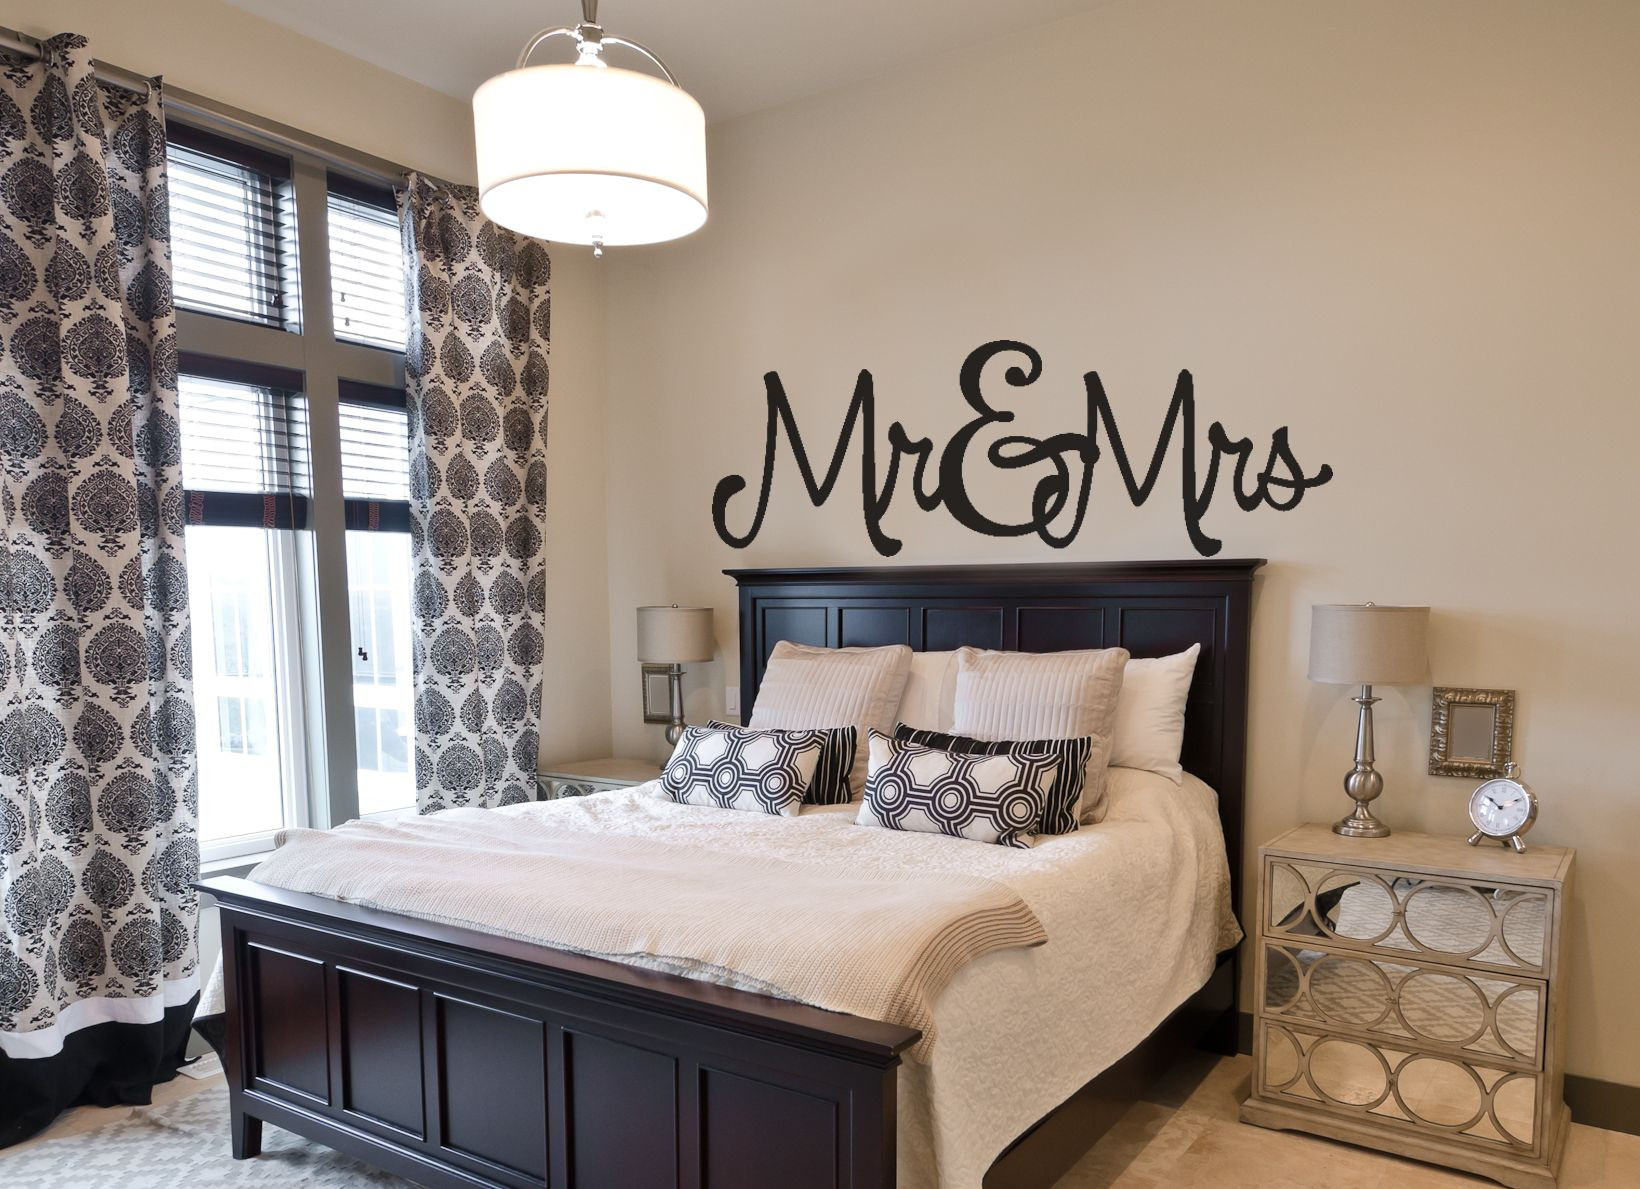 Master Bedroom Wall Decals
 Bedroom Wall Decal Mr & Mrs